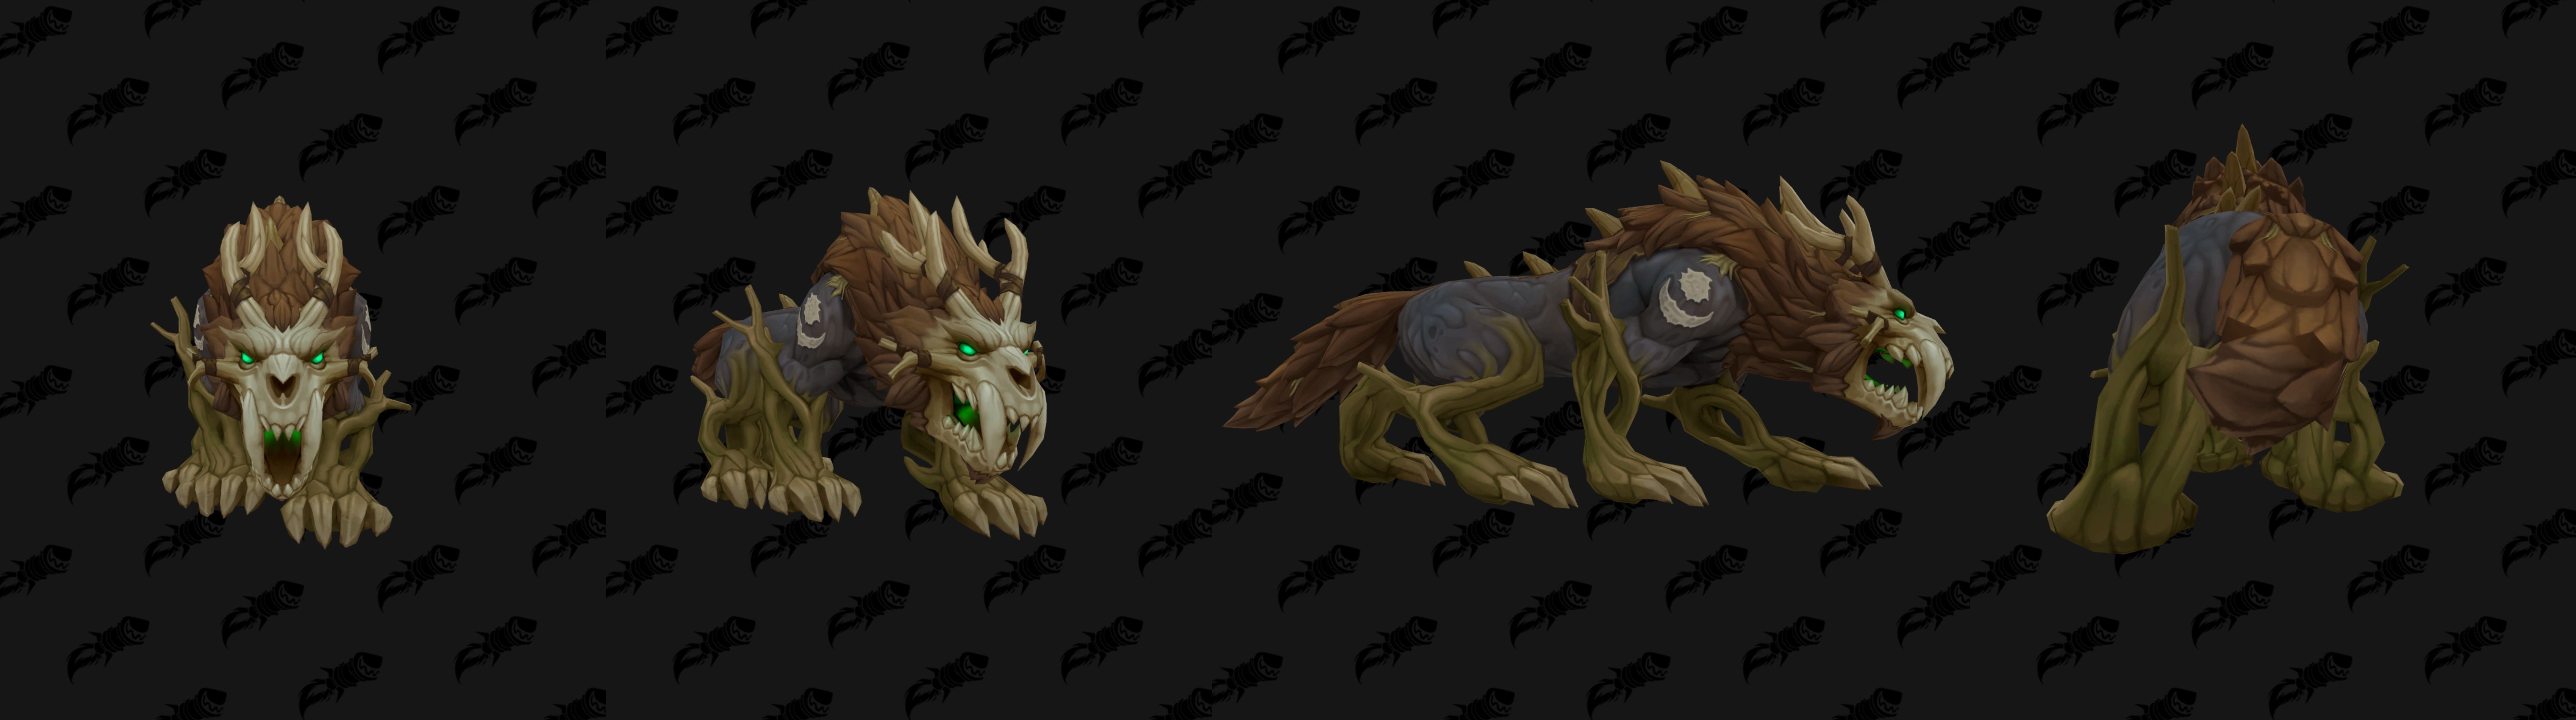 Kul Tiran druid forms – Complete guide